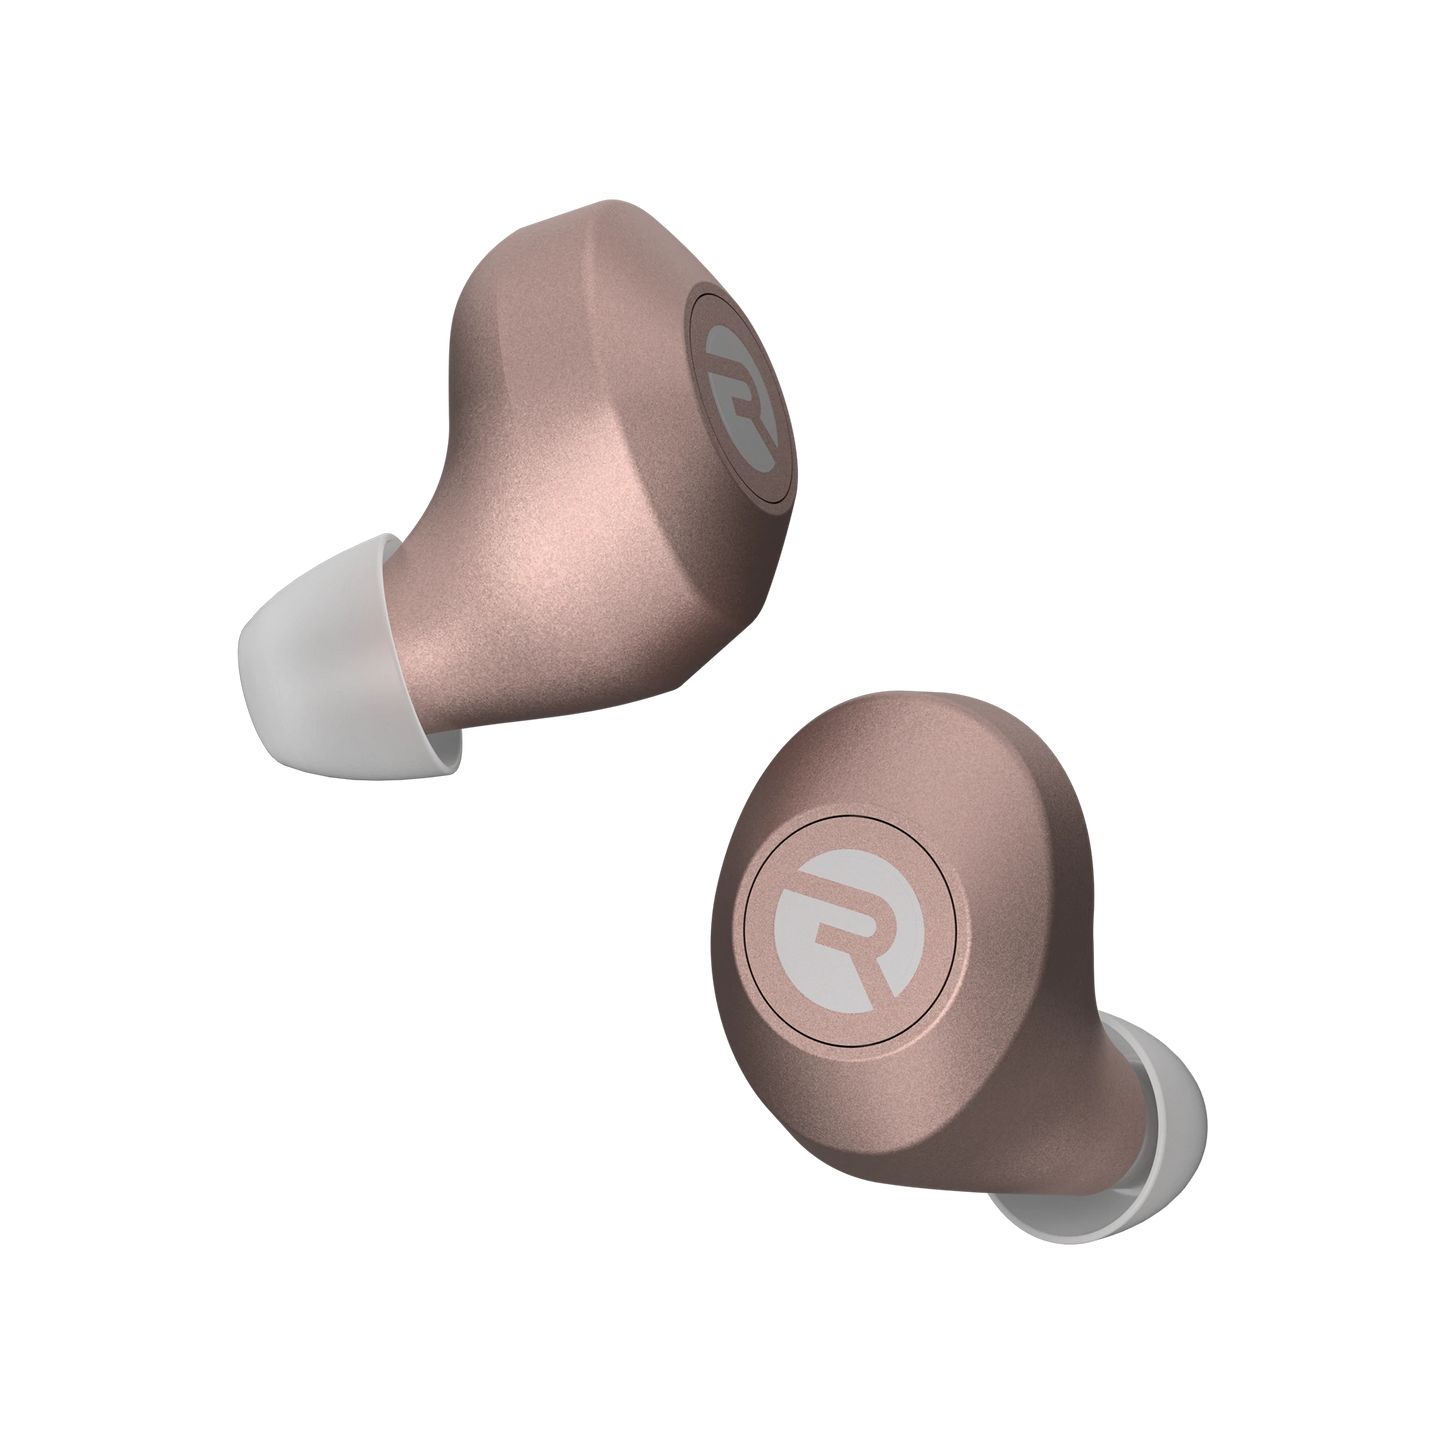 The Everyday Earbuds – Raycon